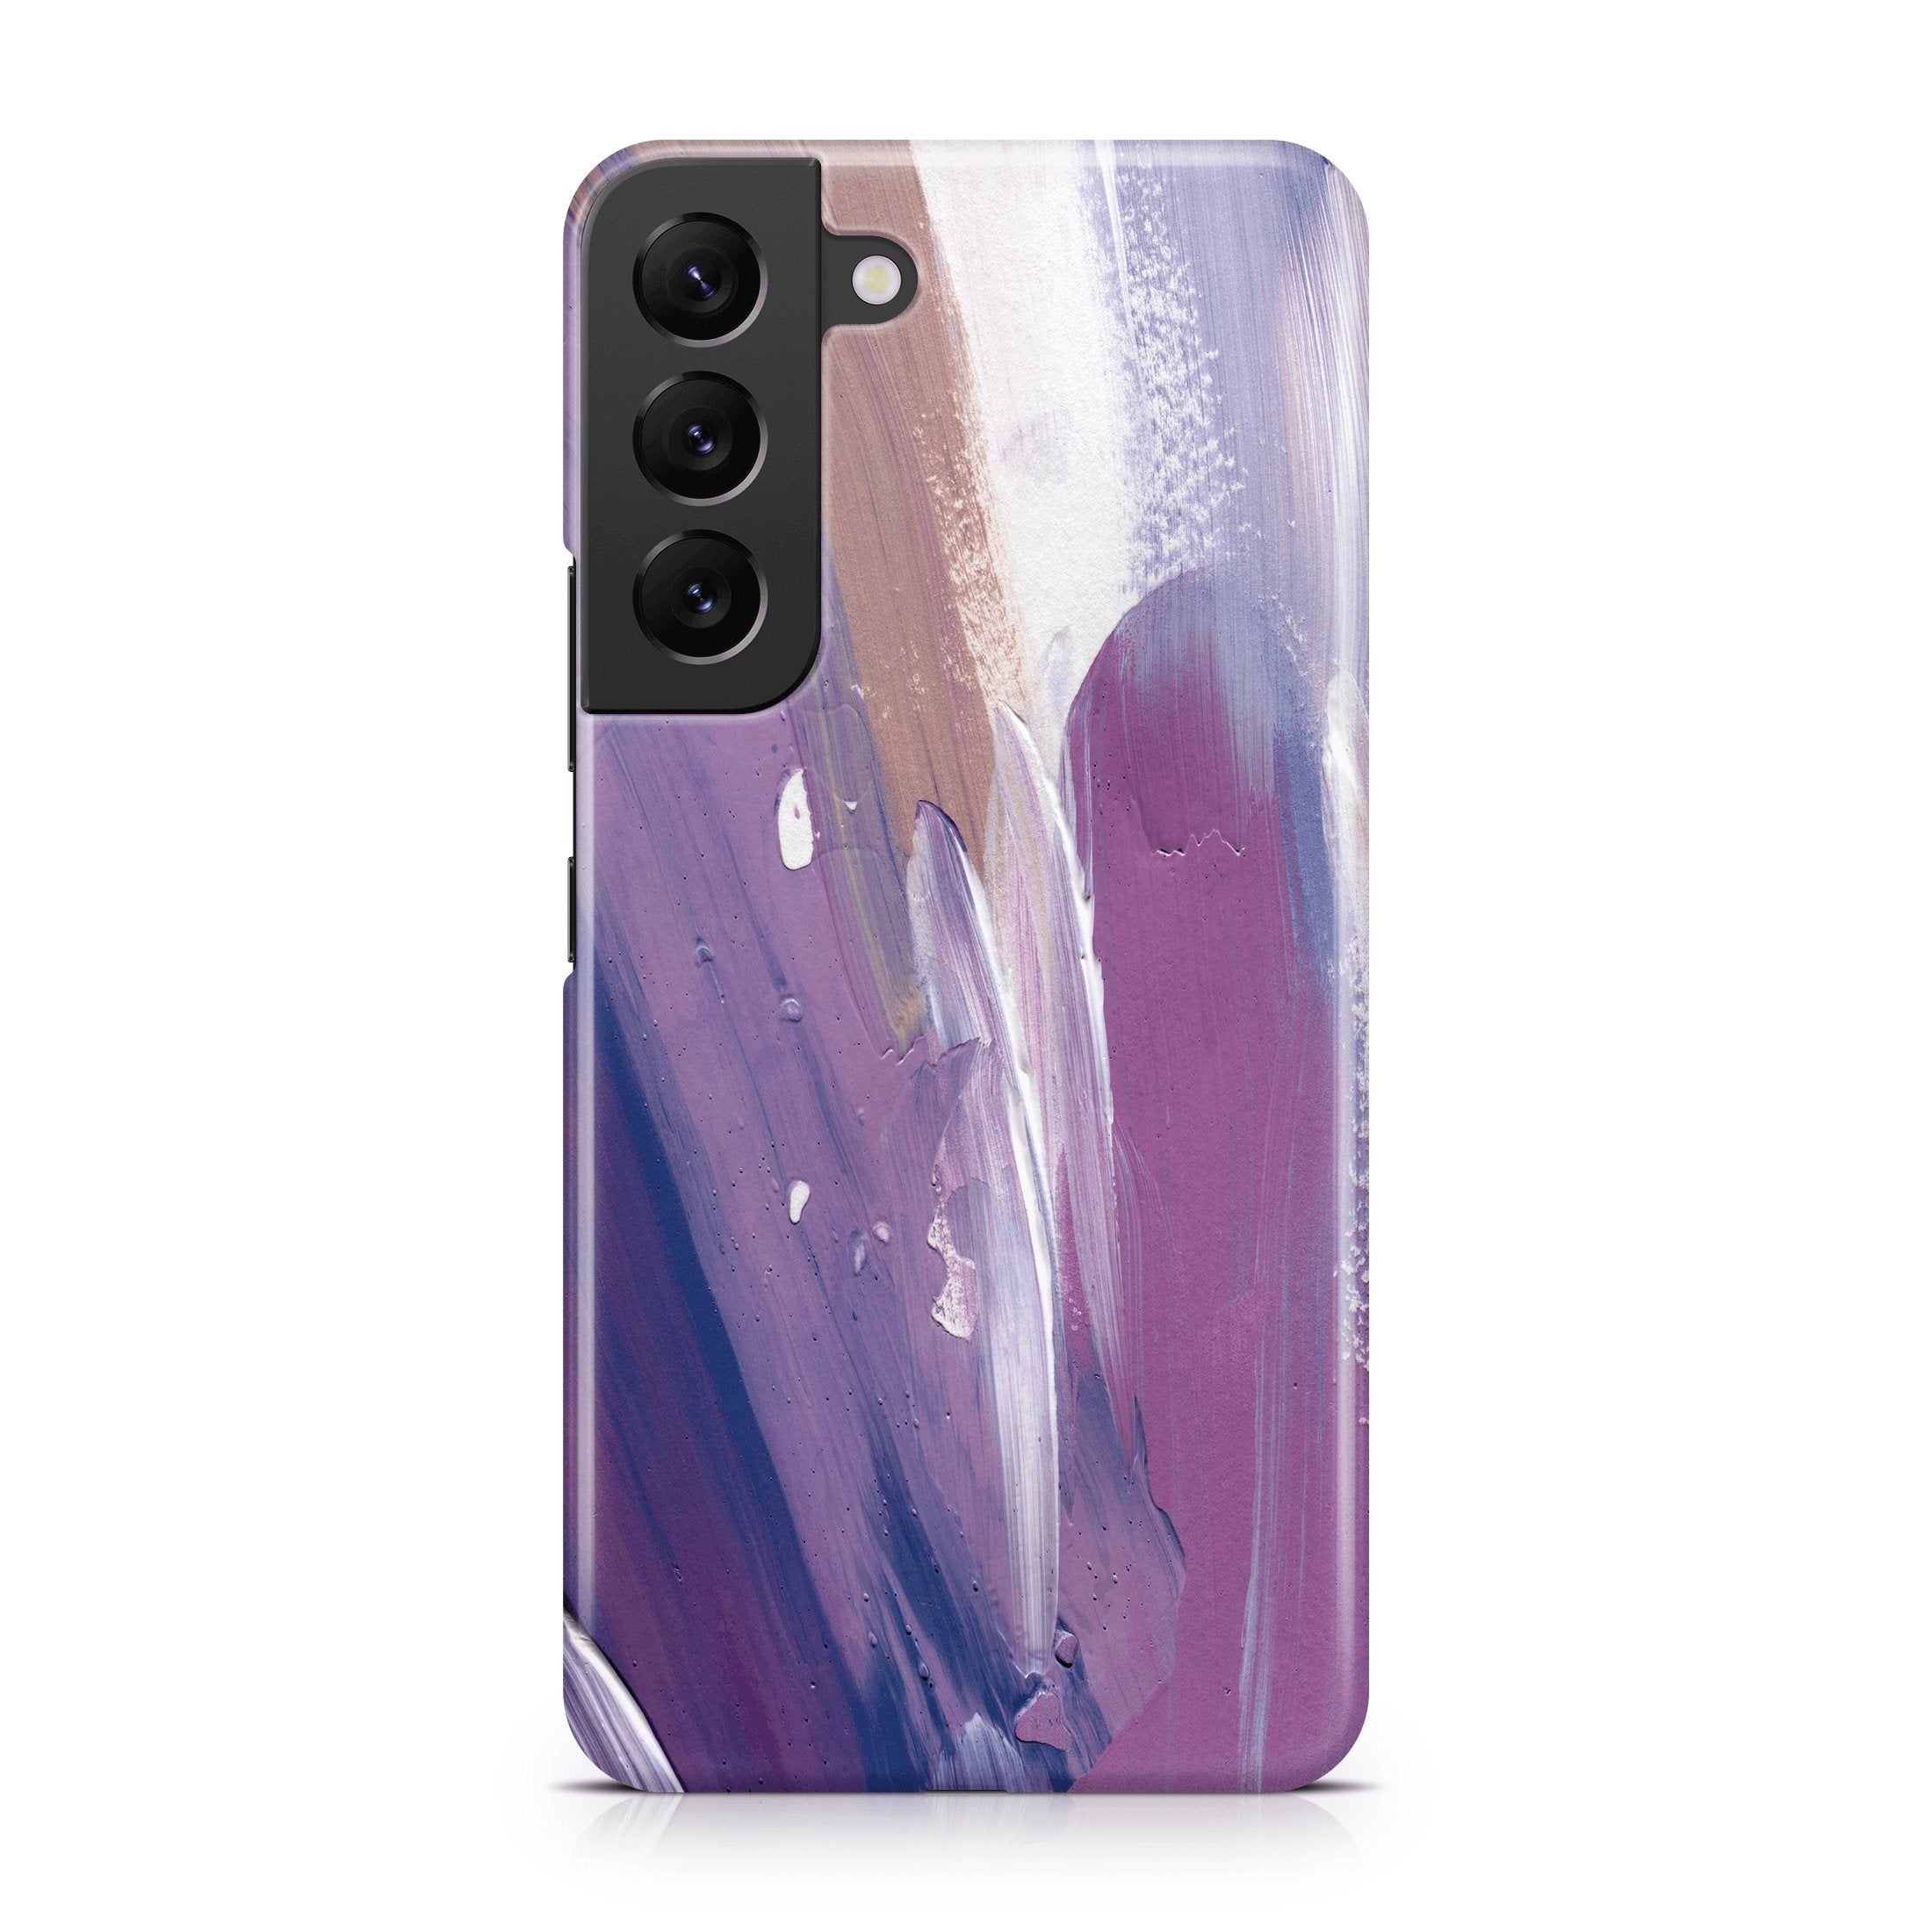 Makeup Blender II - Samsung phone case designs by CaseSwagger 